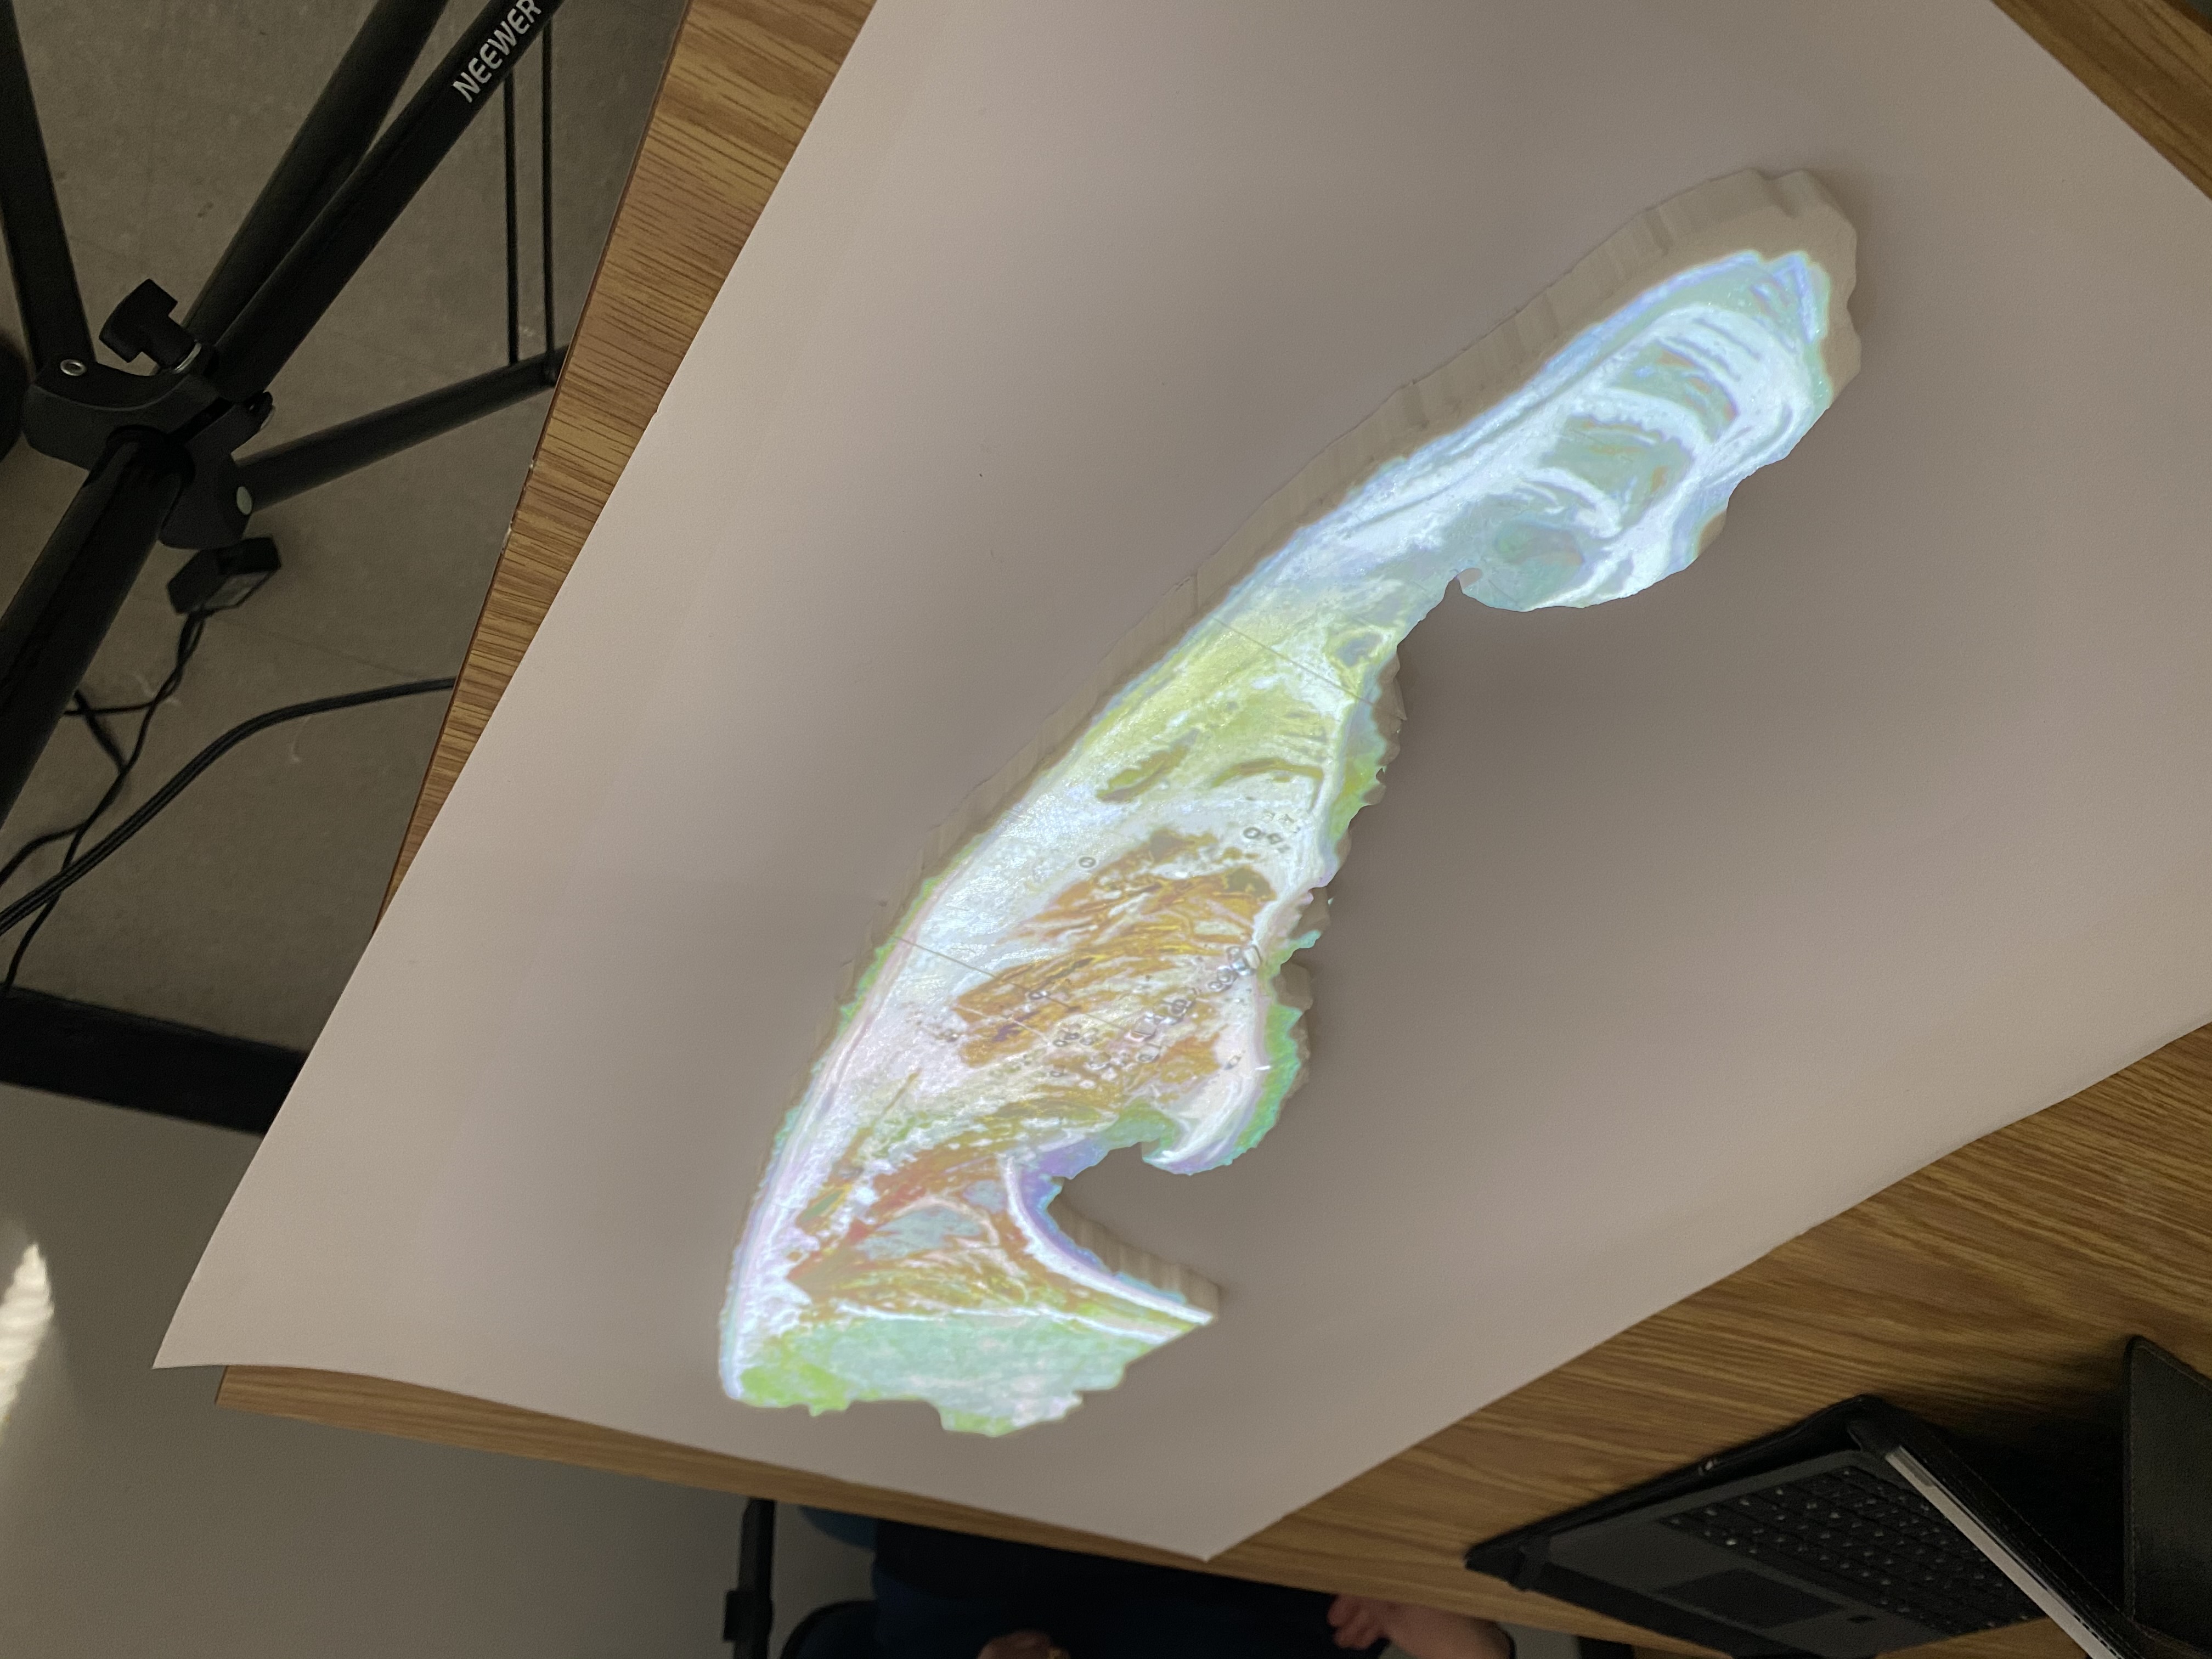 Orthomosaic projected onto a 3D printed model of Pauline Cove